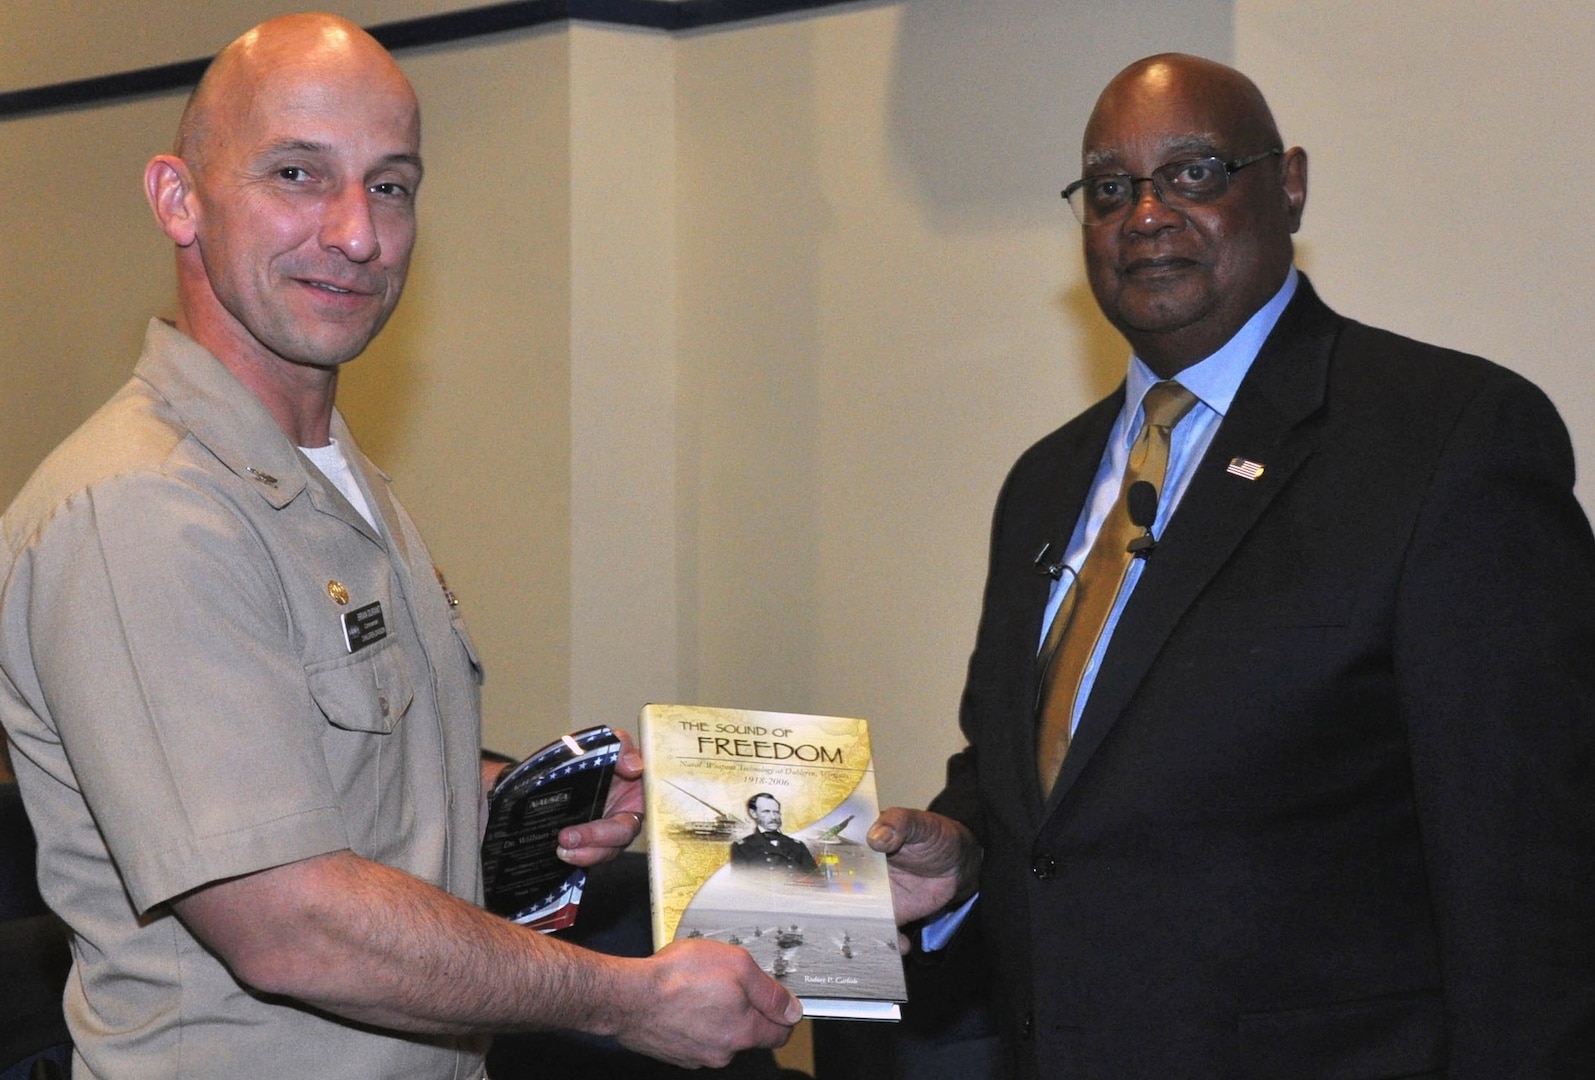 DAHLGREN, Va. - Capt. Brian Durant, Naval Surface Warfare Center Dahlgren Division (NSWCDD) commander, presents the Dahlgren history book, "The Sound of Freedom," to Dr. William Bundy, Gravely Naval Warfare Research Group director, at the 2016 Black History Month Observance, Feb. 11.  "The research and development progress that was shared with me on the railgun and directed energy systems was very reassuring," said Bundy, a U.S. Naval War College professor who toured NSWCDD electromagnetic railgun and directed energy facilities after inspiring a military and civilian audience with his keynote speech at the observance. "Those capabilities will certainly deliver advantages for our maritime forces.  It was absolutely encouraging to witness first-hand the remarkable effort and work that is continuing today at Dahlgren."  